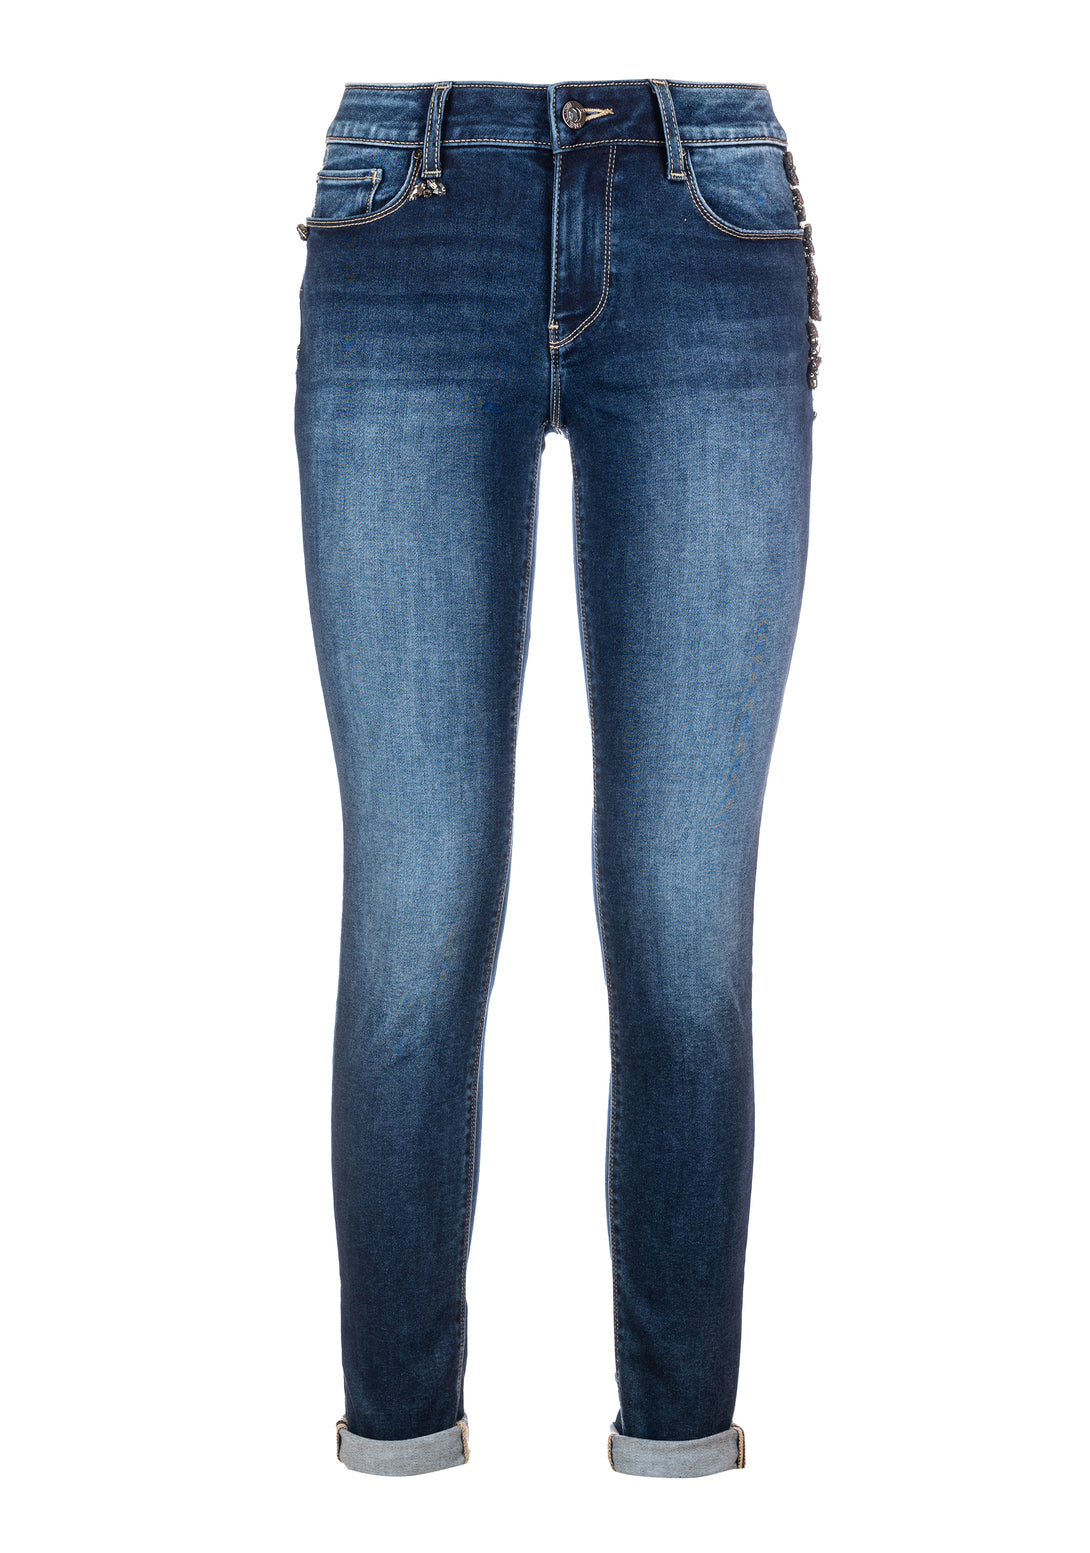 Jeans slim fit push up effect made in denim with middle wash